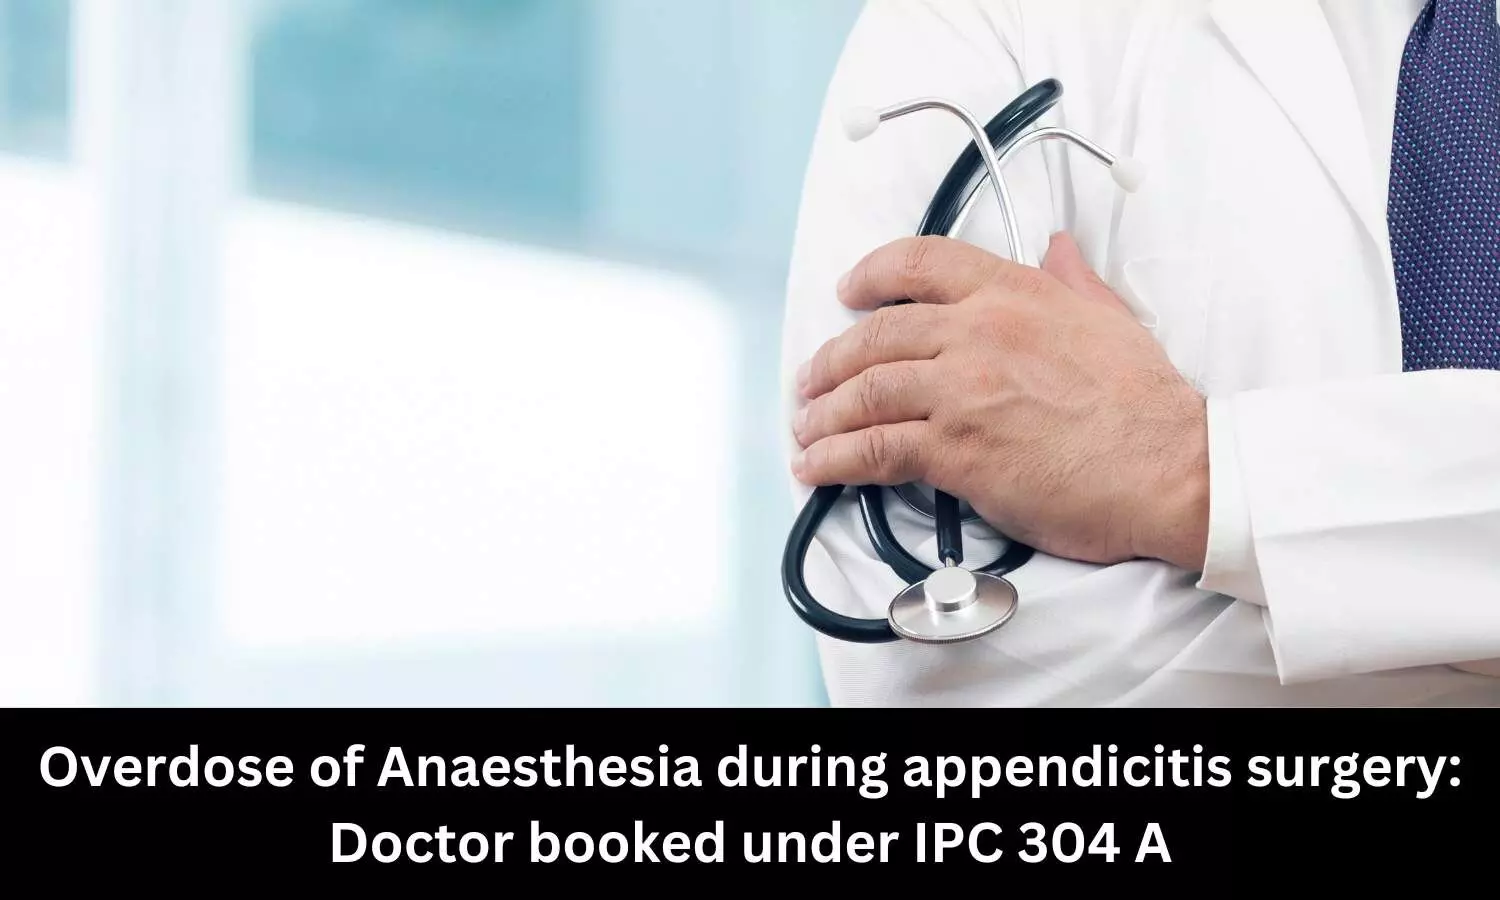 UP hospital sealed, doctor booked for patients death due to anaesthesia overdose